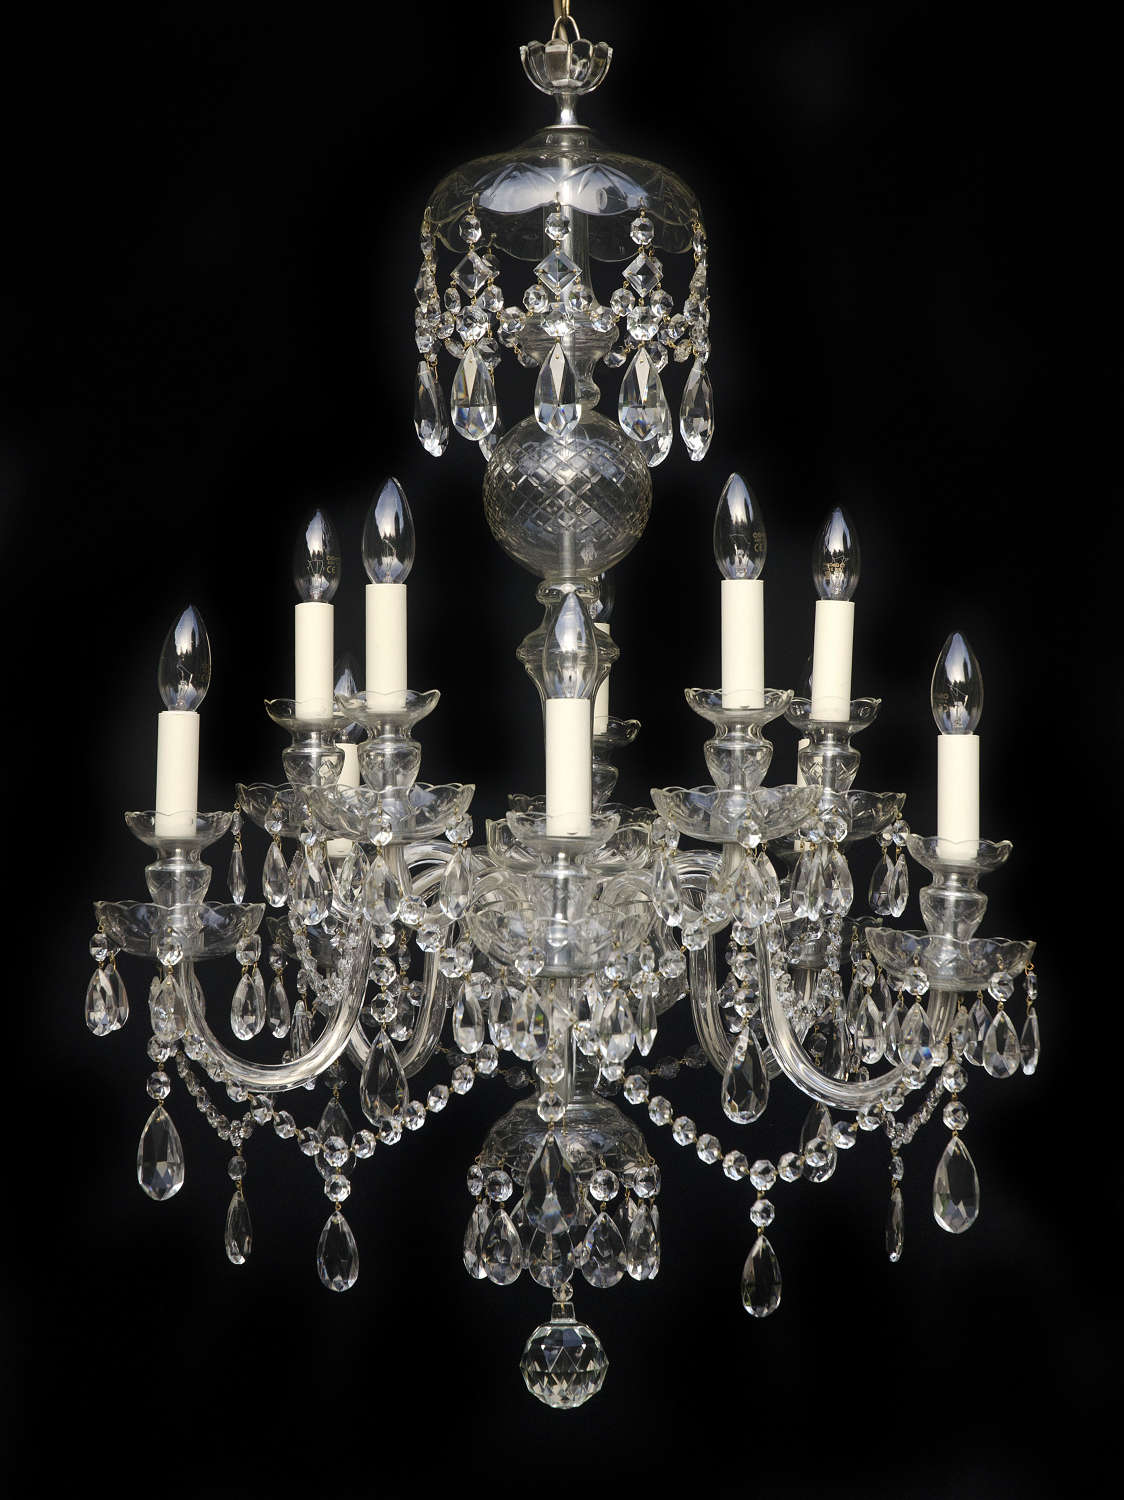 Large 2 Tiered, 10 Light, Italian Glass Arm Antique Chandelier